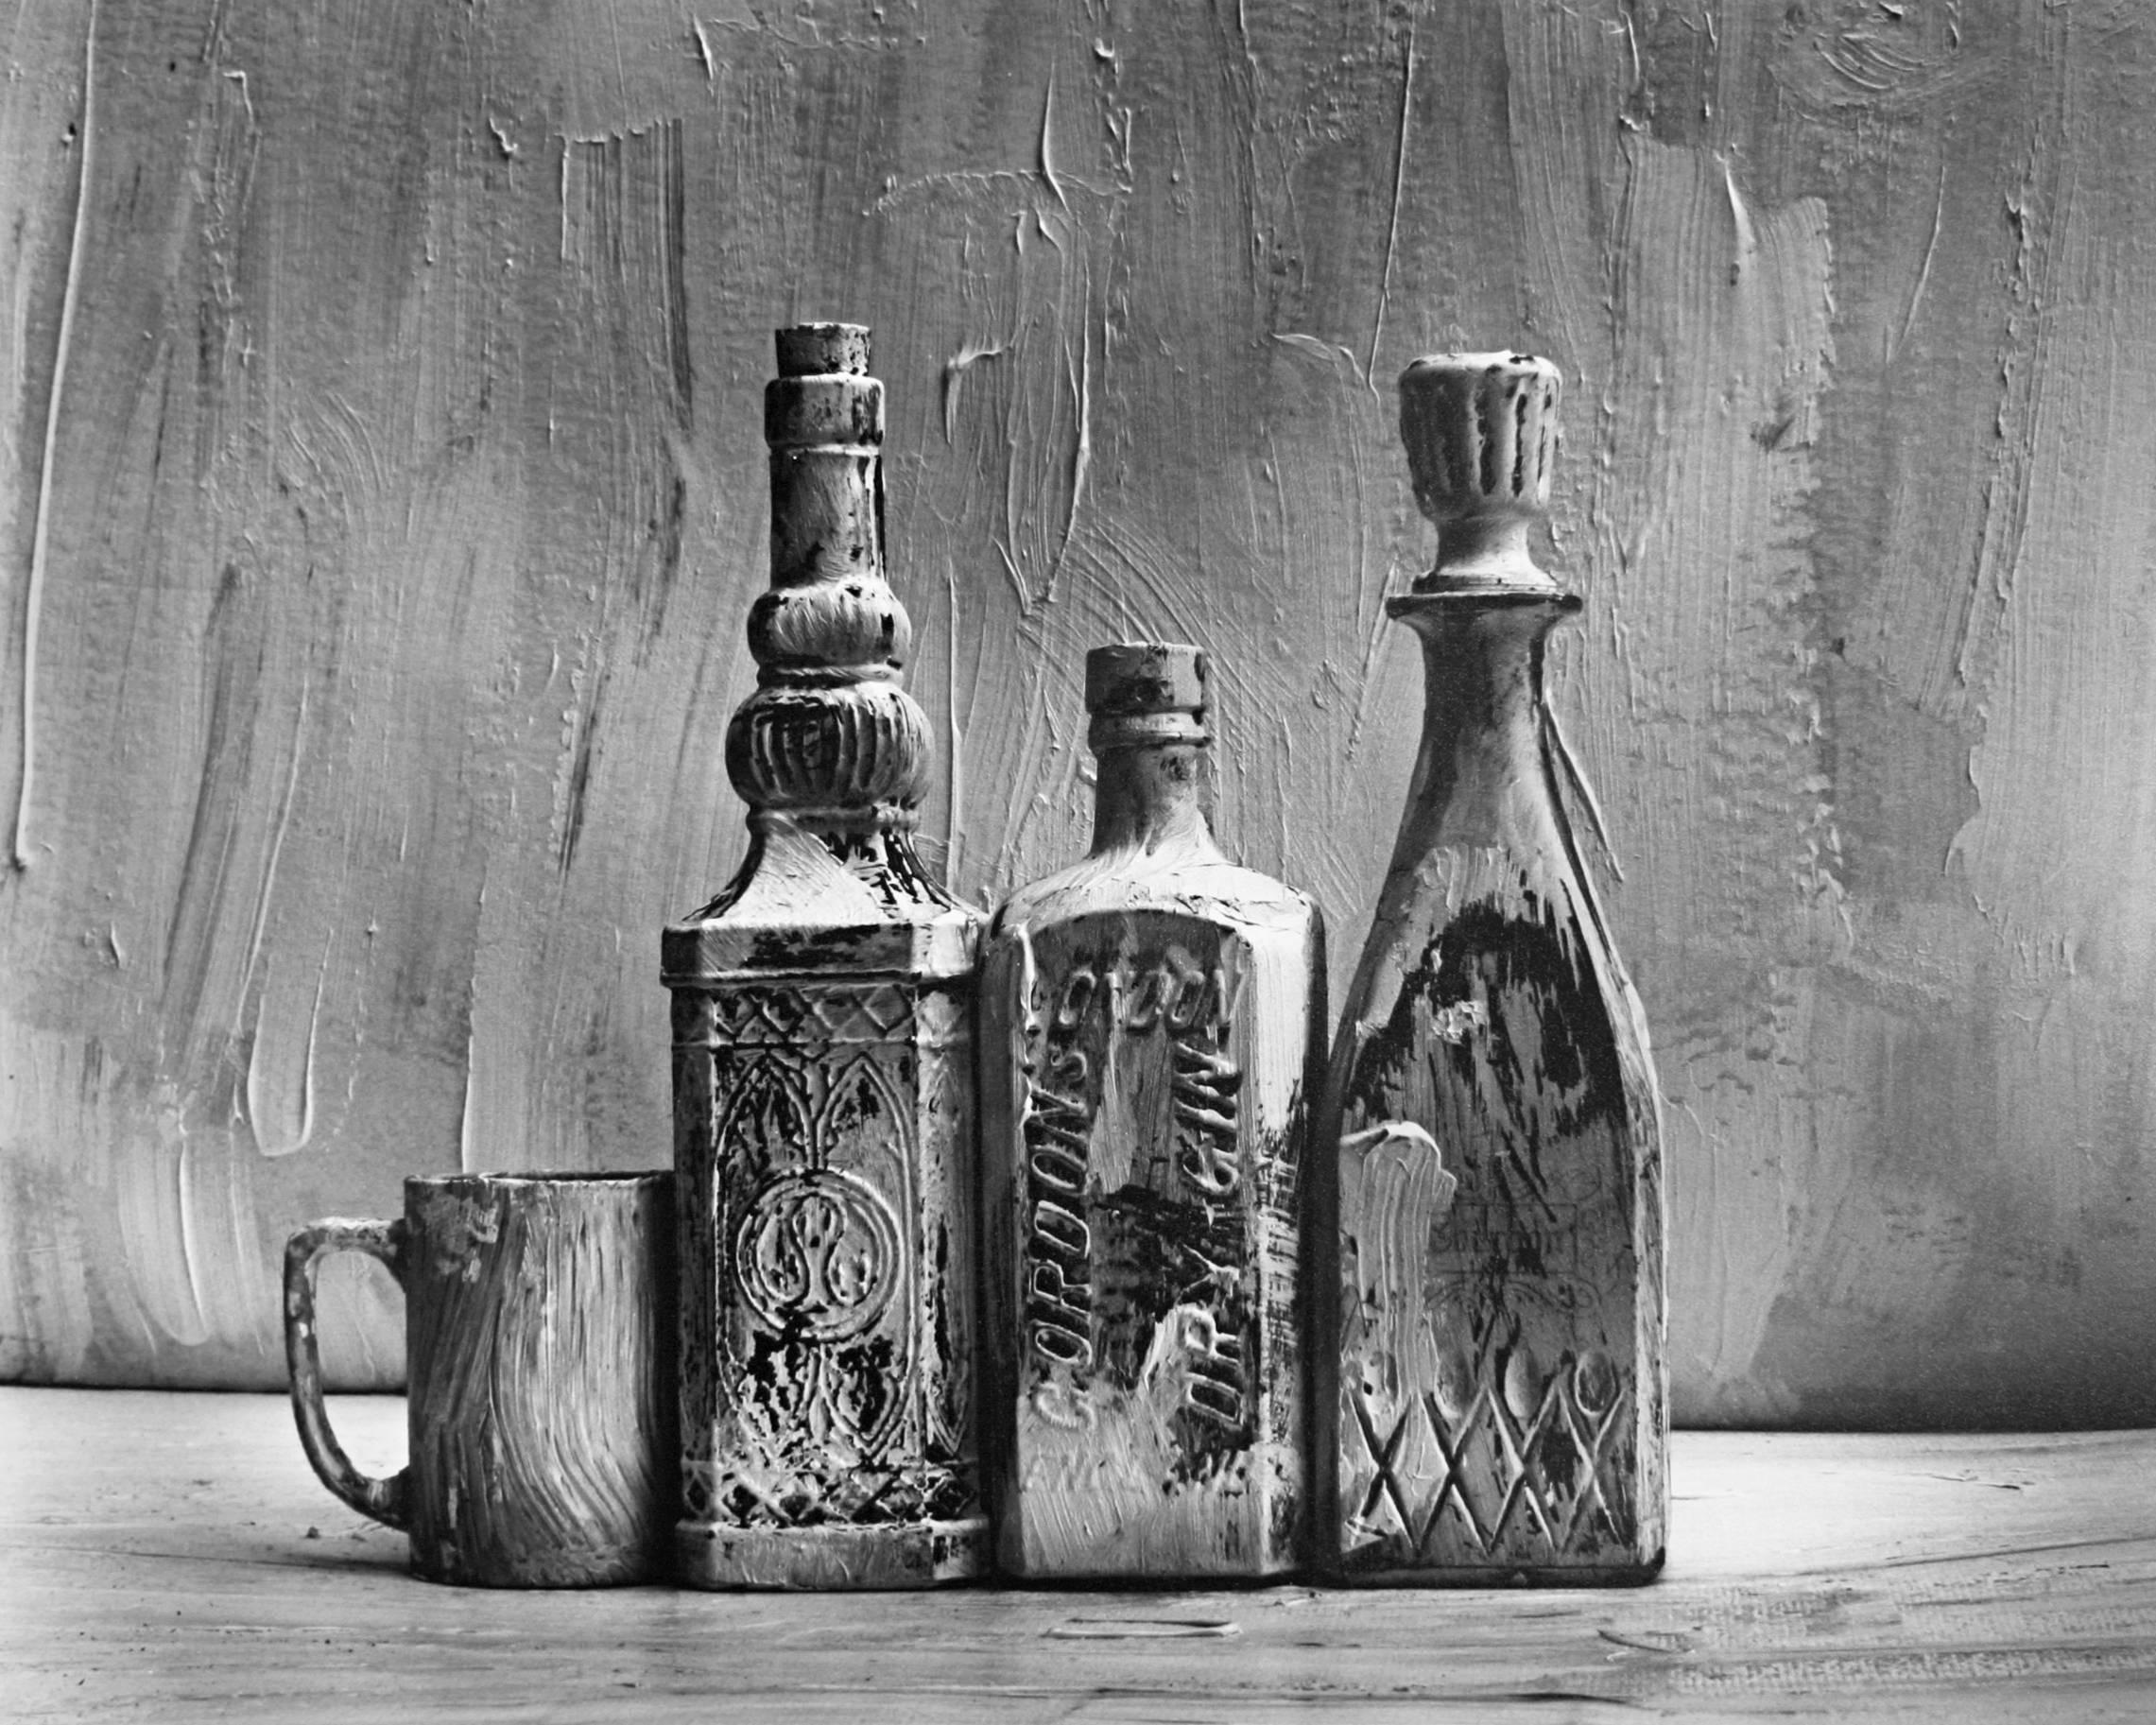 Alexandra Catiere Black and White Photograph - Homage to Morandi, Painted Bottles , Black and white still life photography